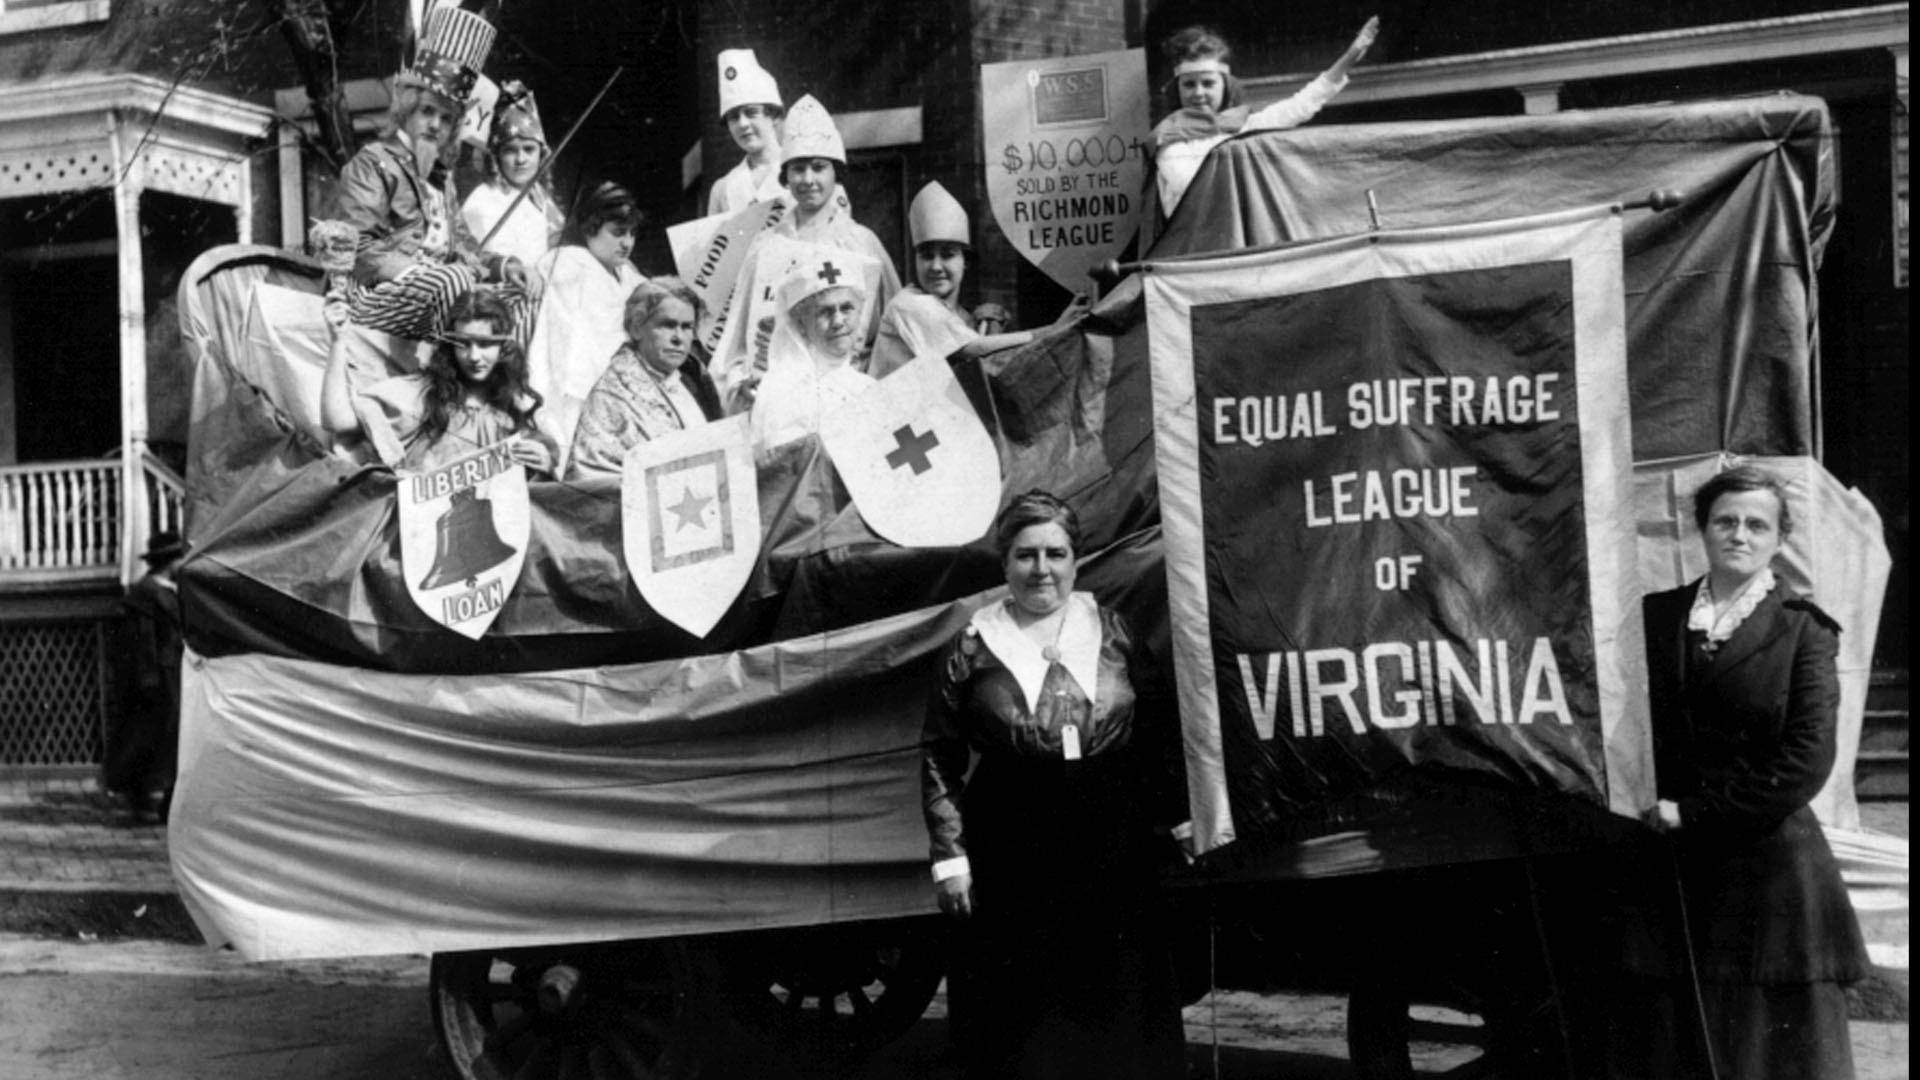 Black and white image of the Equal Suffrage League of Virginia